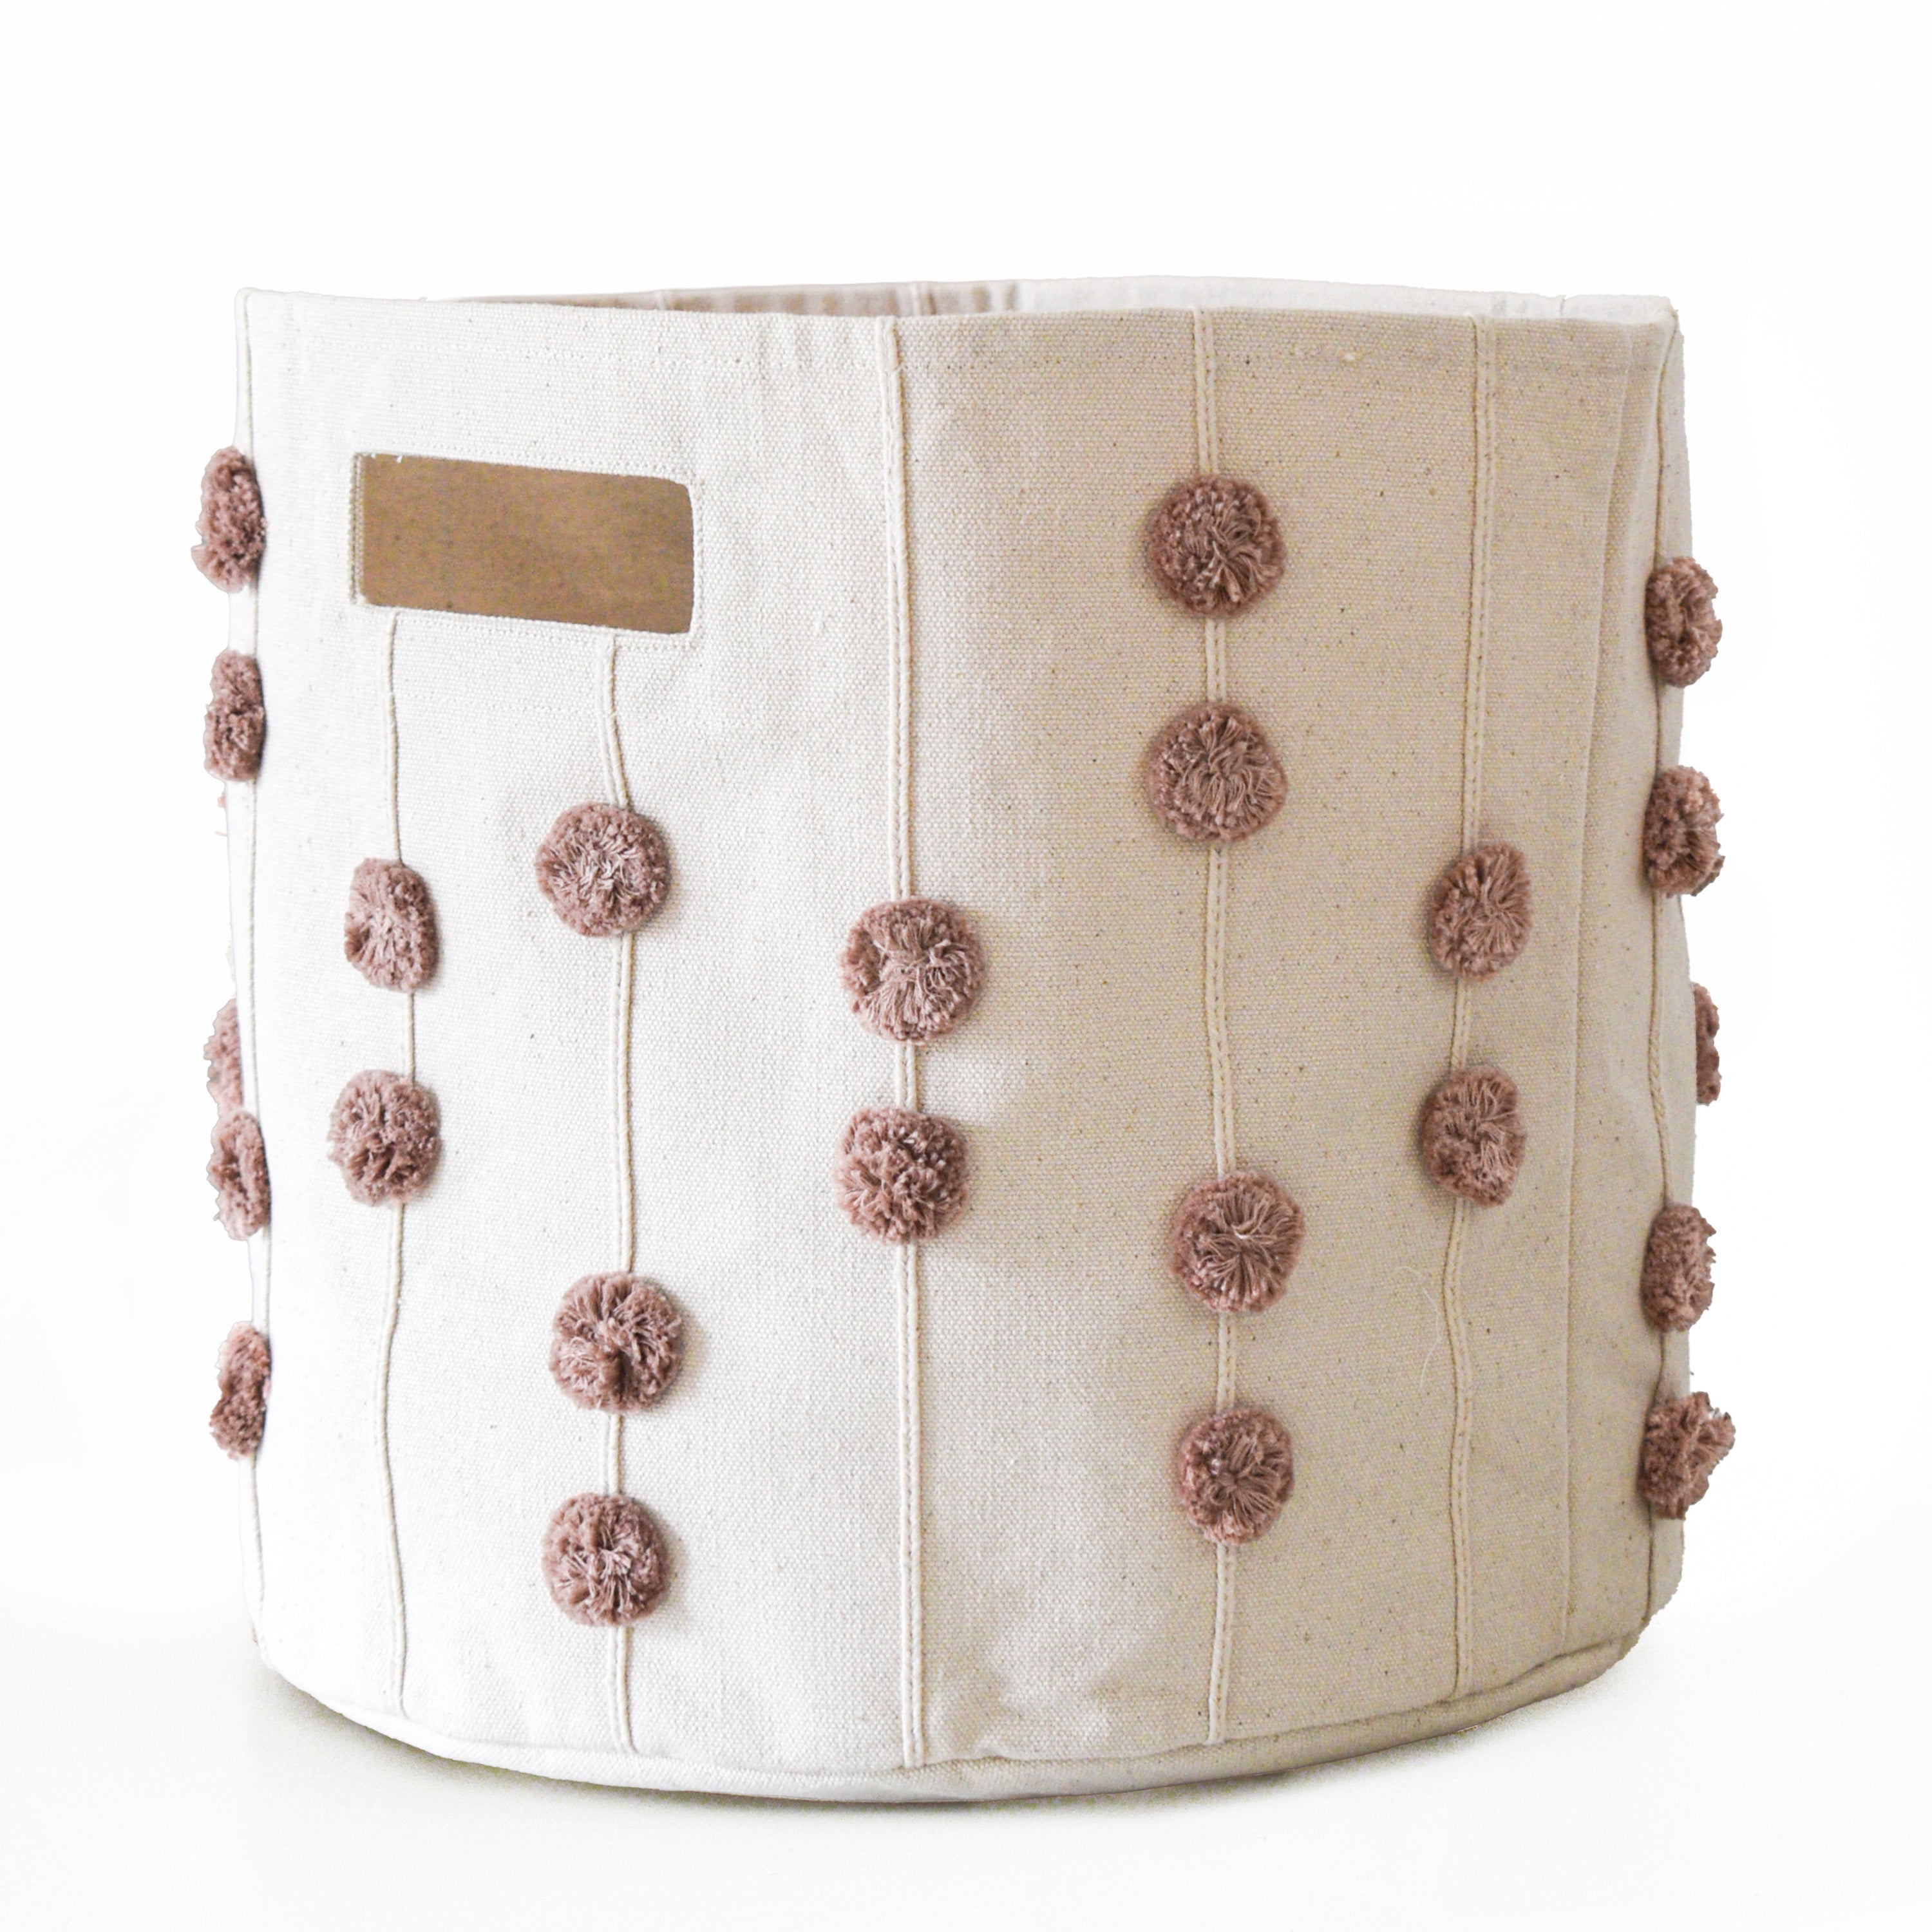 A beige fabric Storage Basket Pompom Pecan decorated with rows of small, soft, pink pom-poms and a small rectangular label at the top. the background is plain white. Brand Name: Makemake Organics